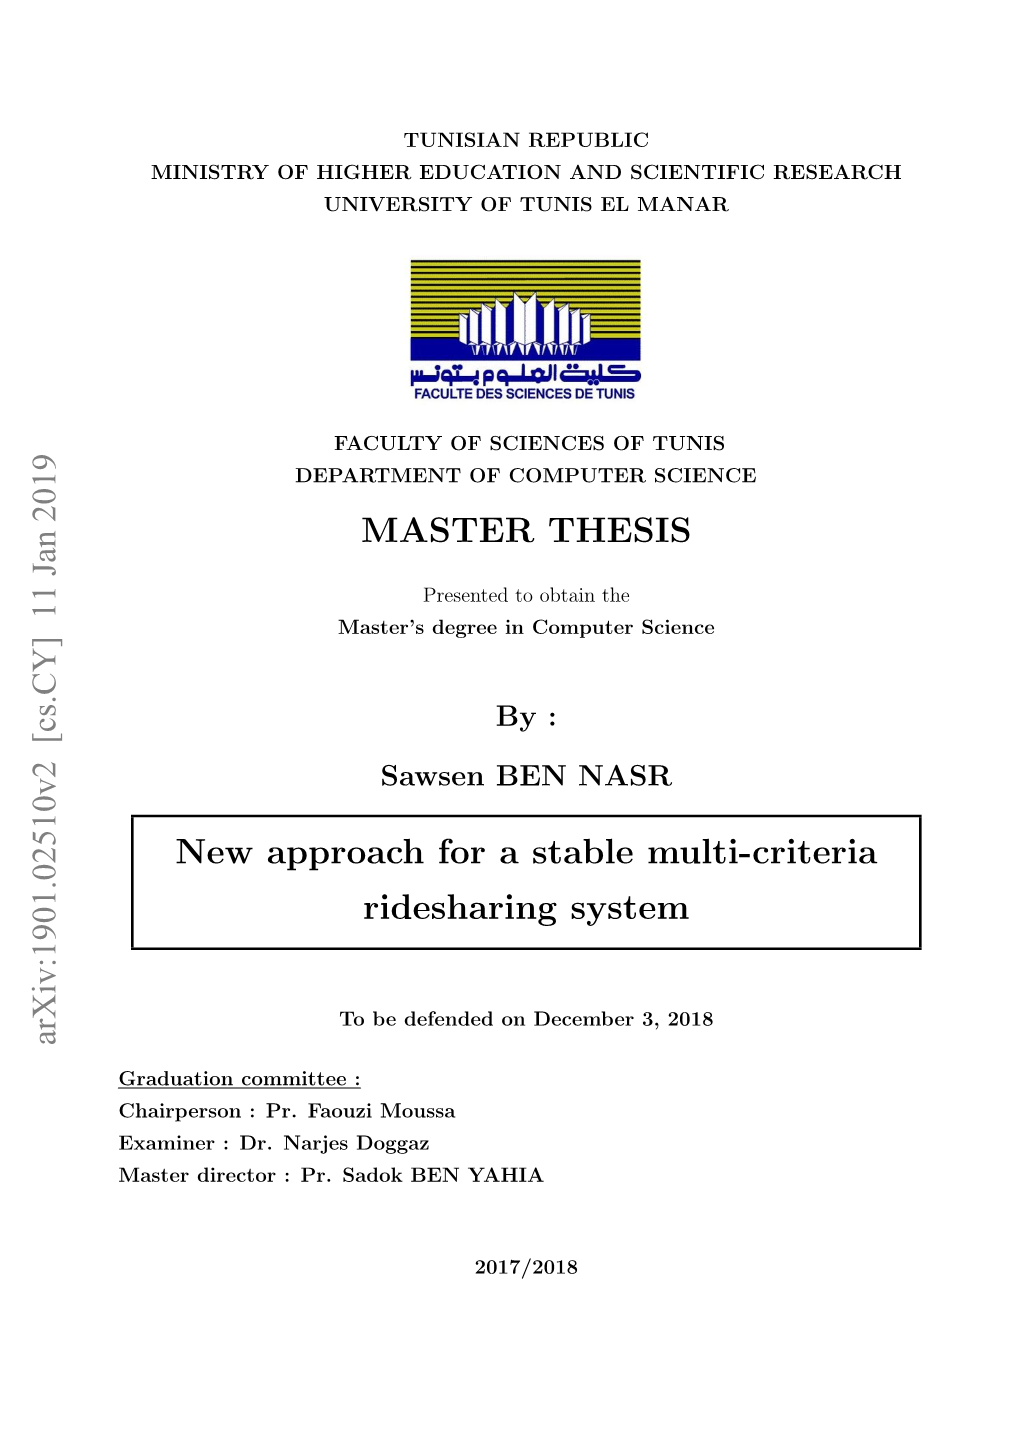 MASTER THESIS New Approach for a Stable Multi-Criteria Ridesharing